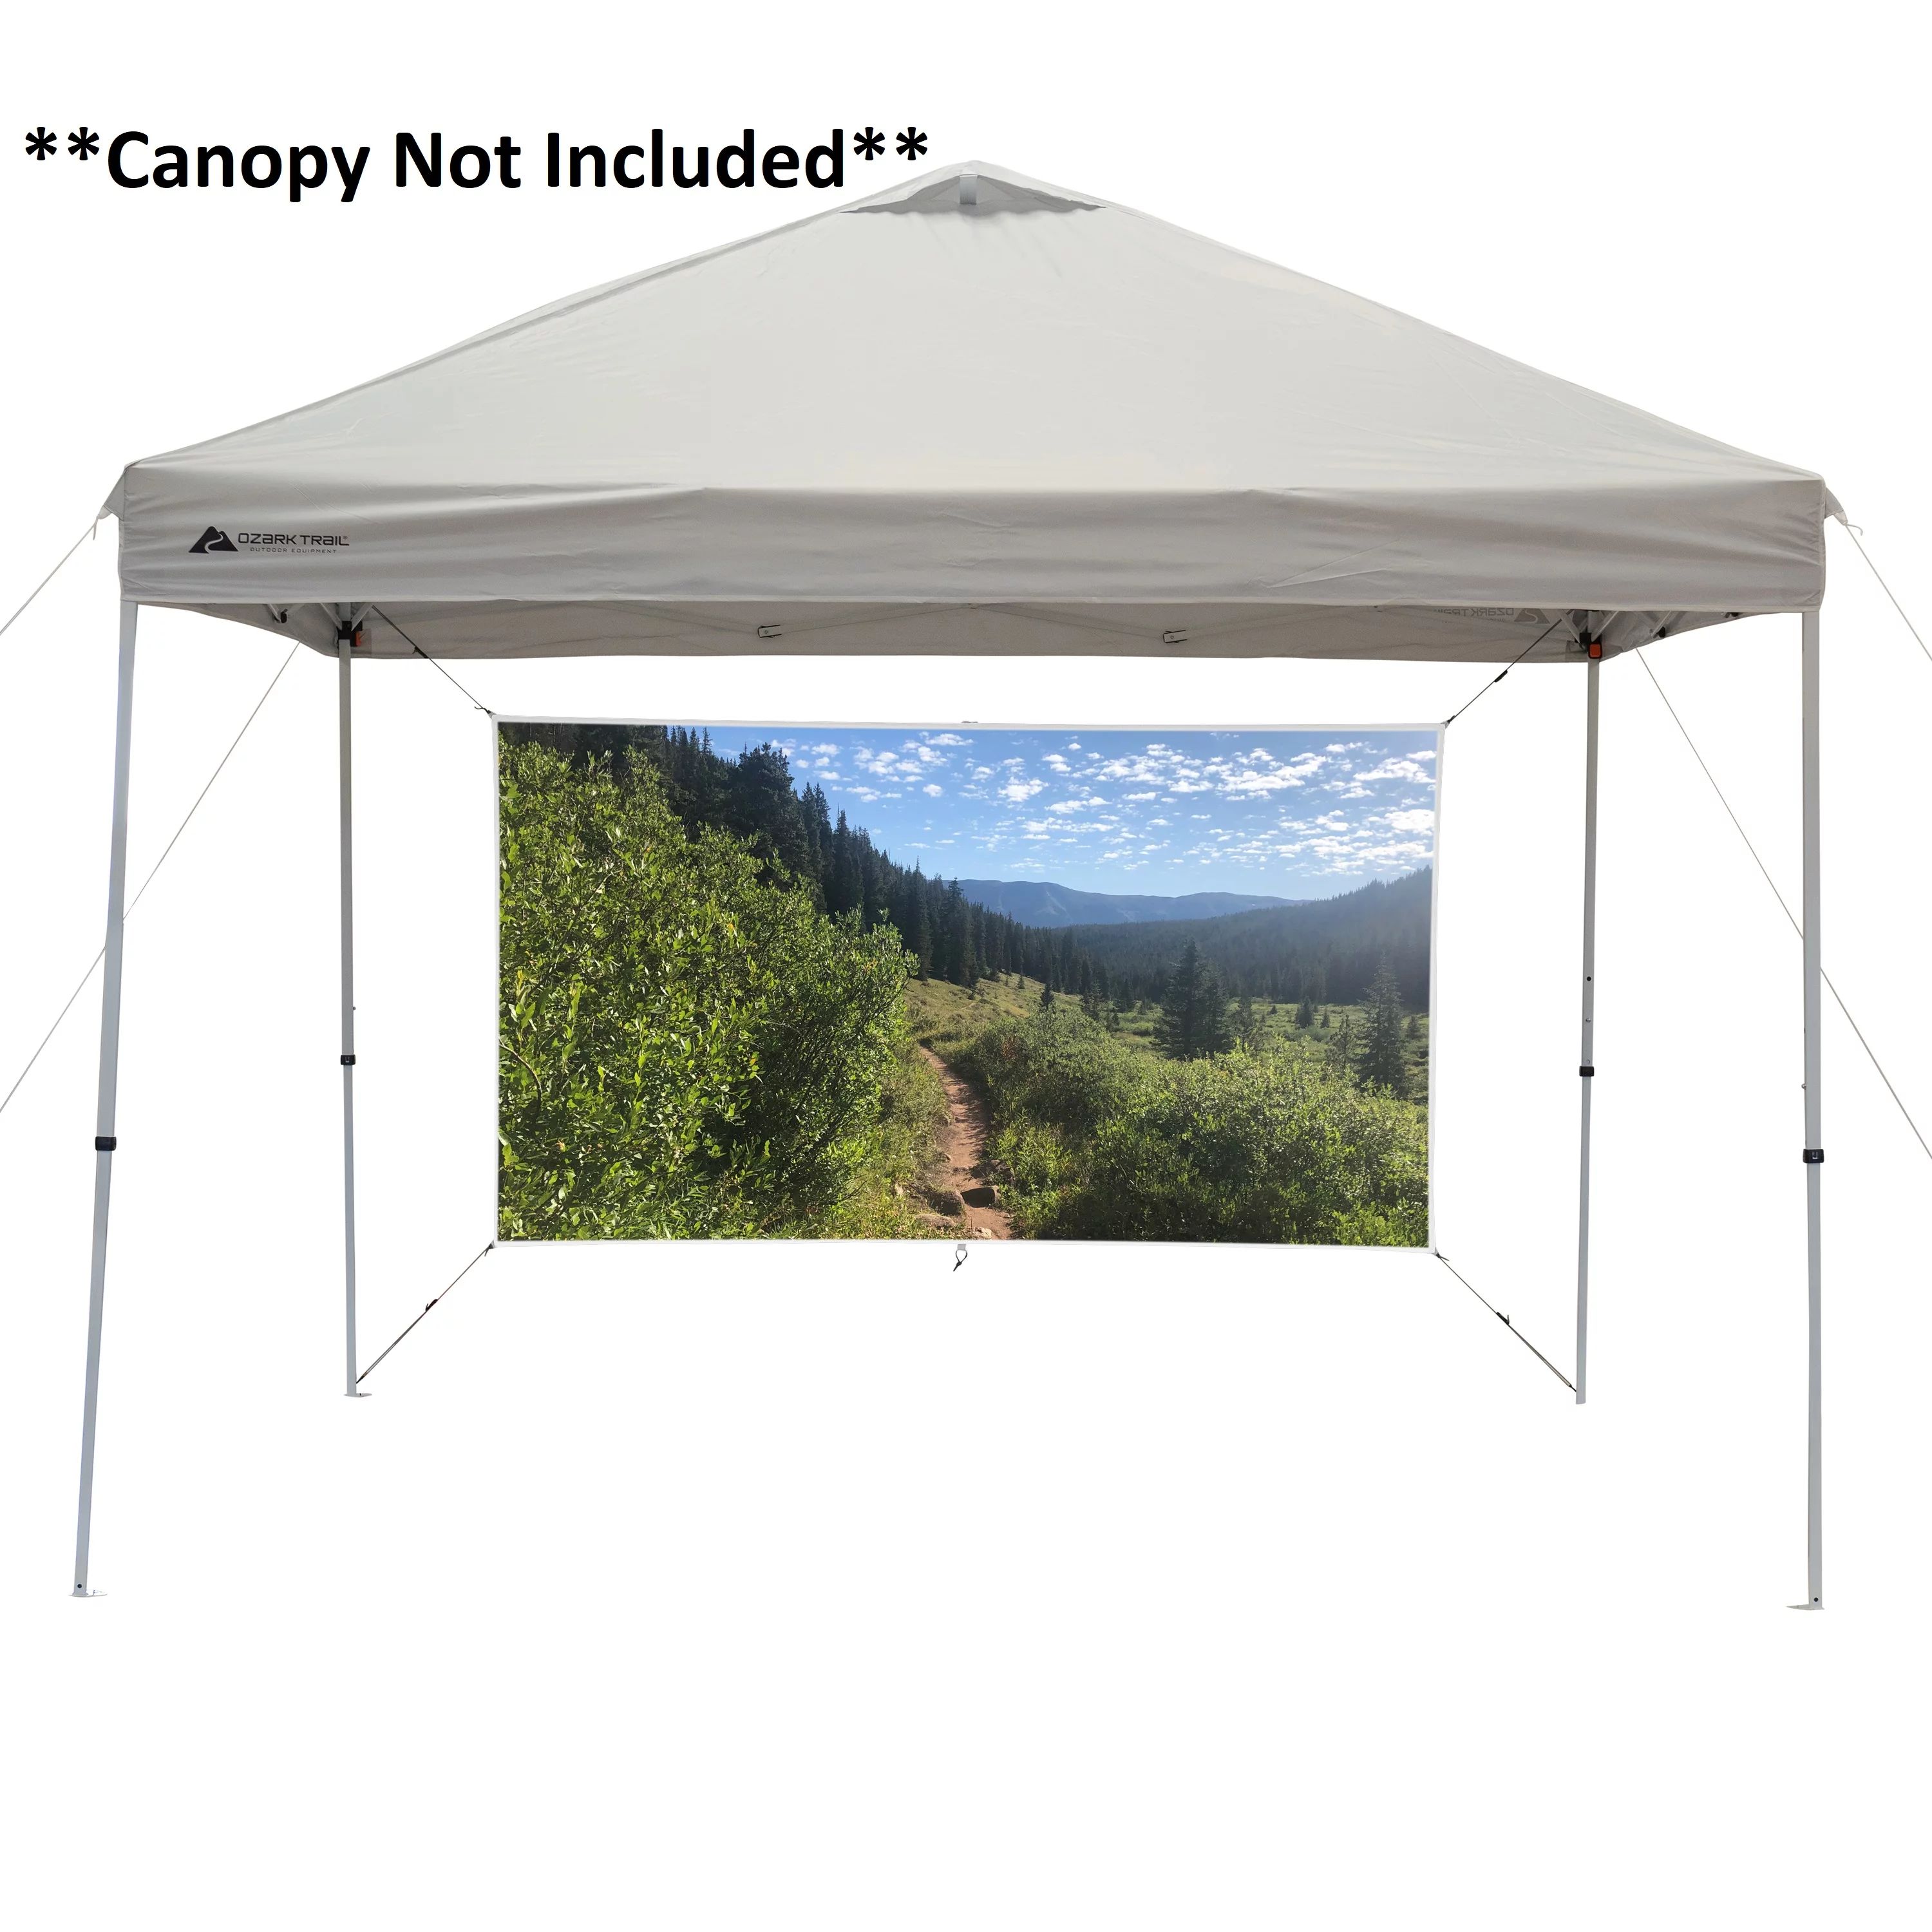 Ozark Trail Outdoor Shade Wall/Projector Screen, White 87.2in. x 49in. for Straight-Leg Canopies | Walmart (US)